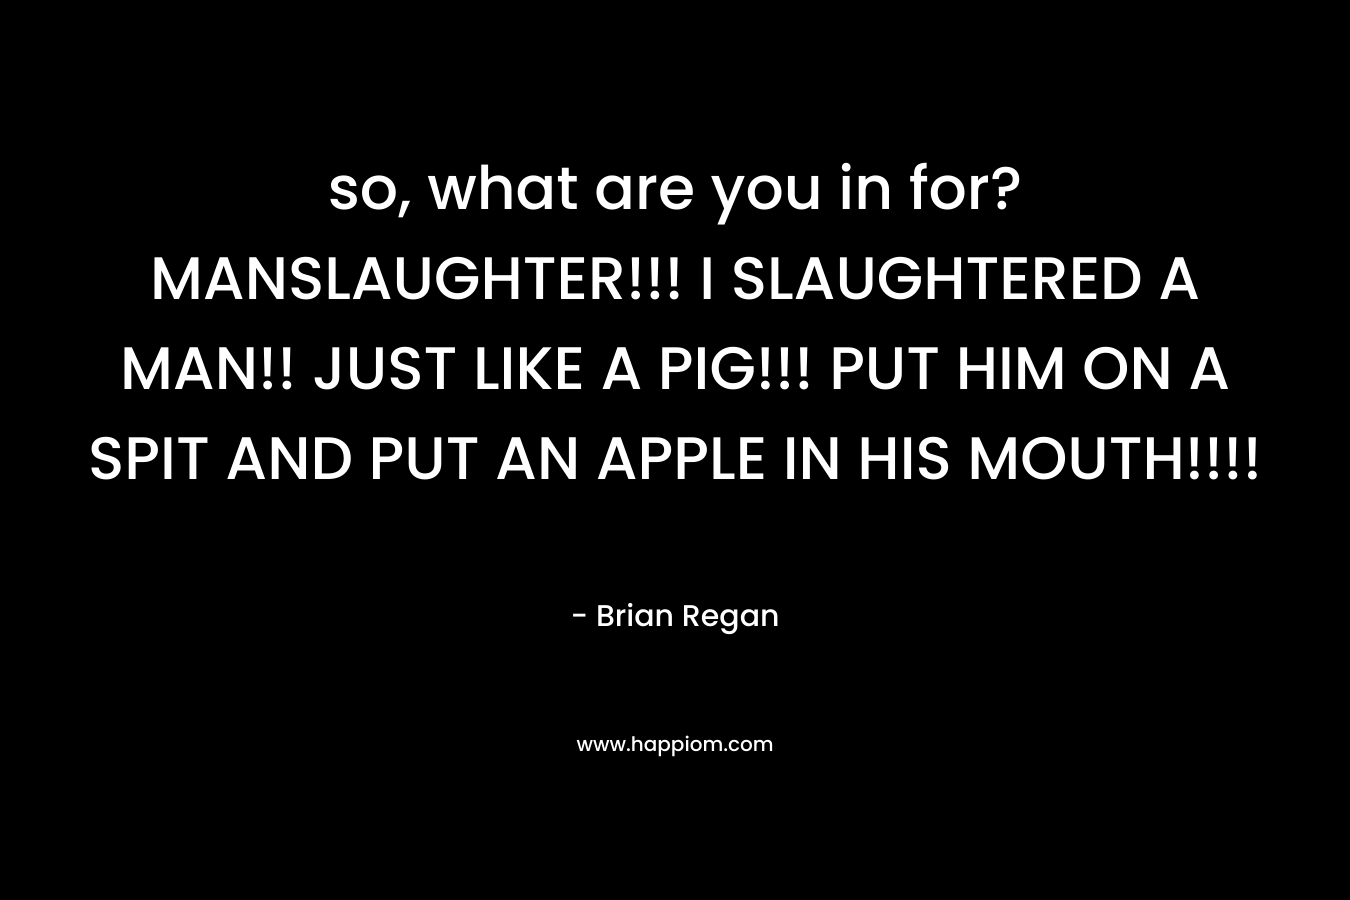 so, what are you in for? MANSLAUGHTER!!! I SLAUGHTERED A MAN!! JUST LIKE A PIG!!! PUT HIM ON A SPIT AND PUT AN APPLE IN HIS MOUTH!!!!